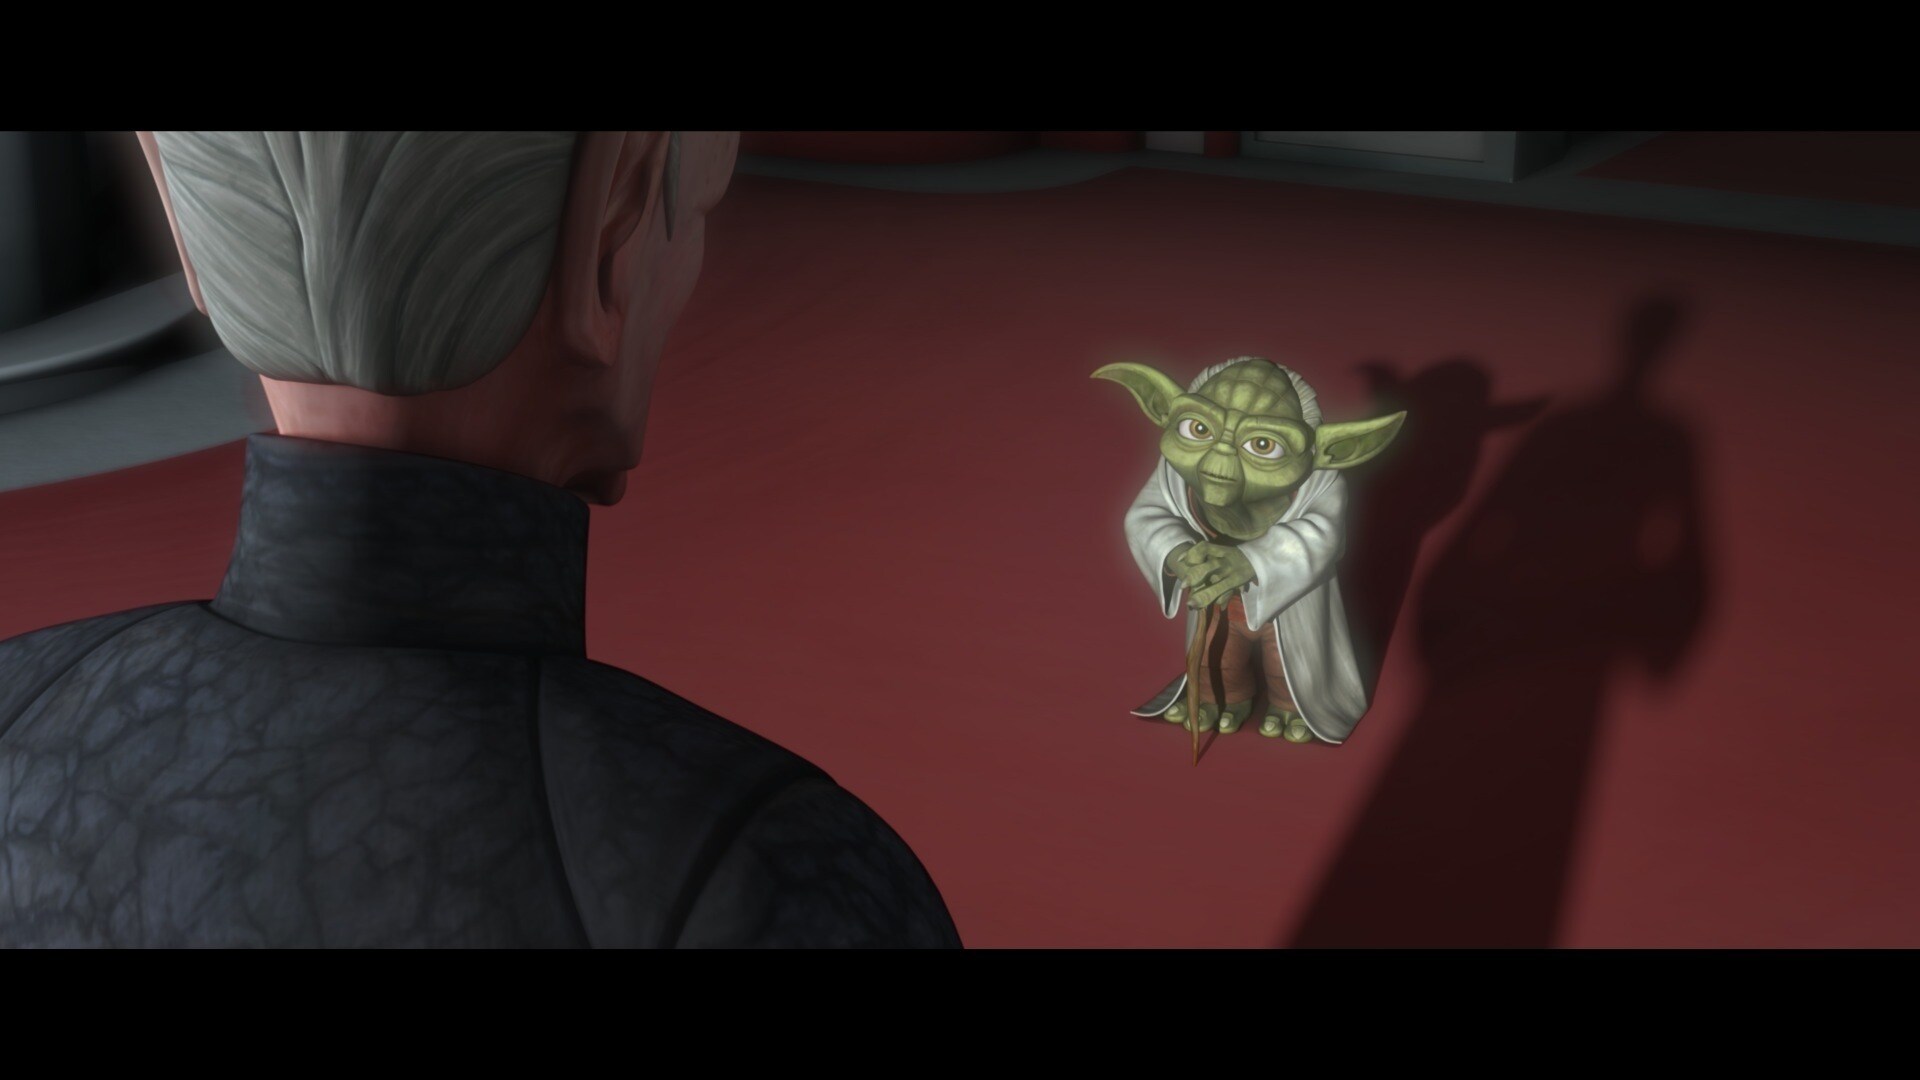 Yoda visits Supreme Chancellor Palpatine in his executive offices to discuss the sealed records. ...